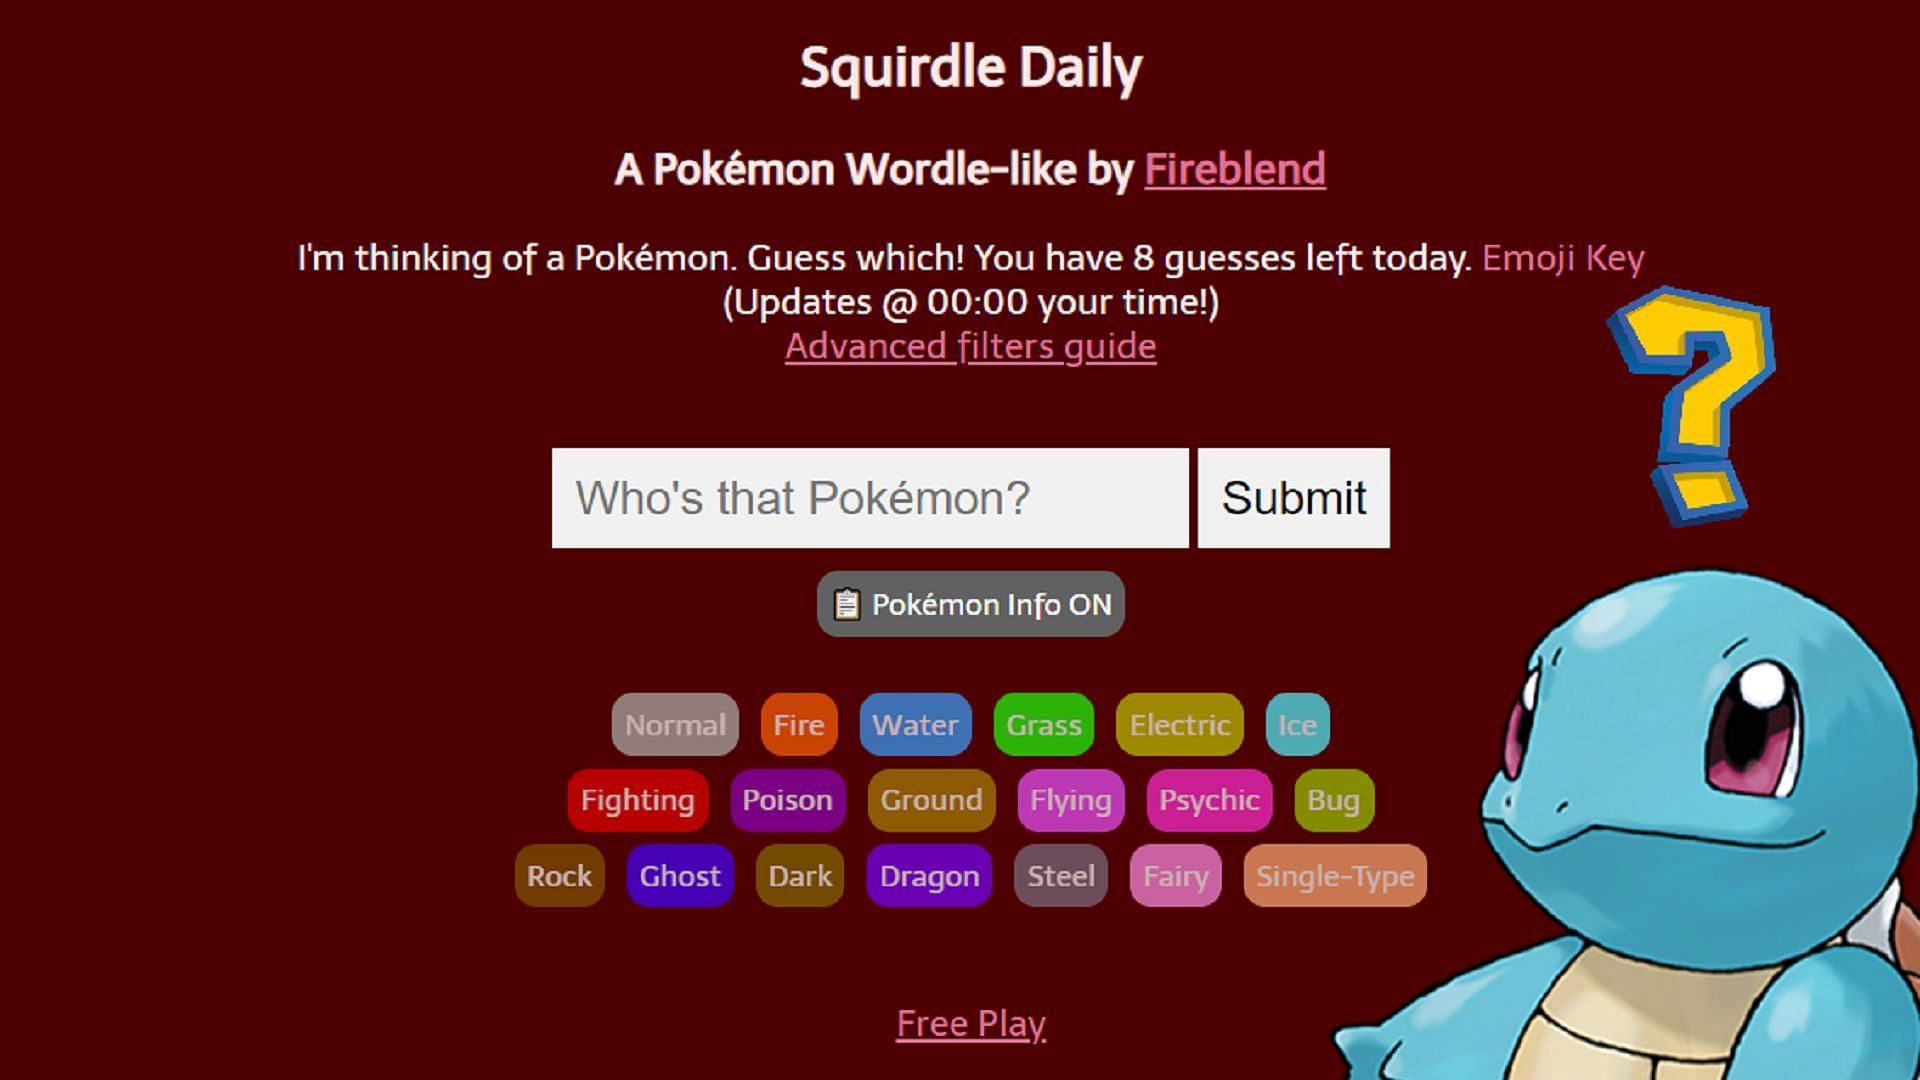 Squirdle is a mix between Wordle and the Pokemon franchise, tasking fans with guessing a daily Pokemon.